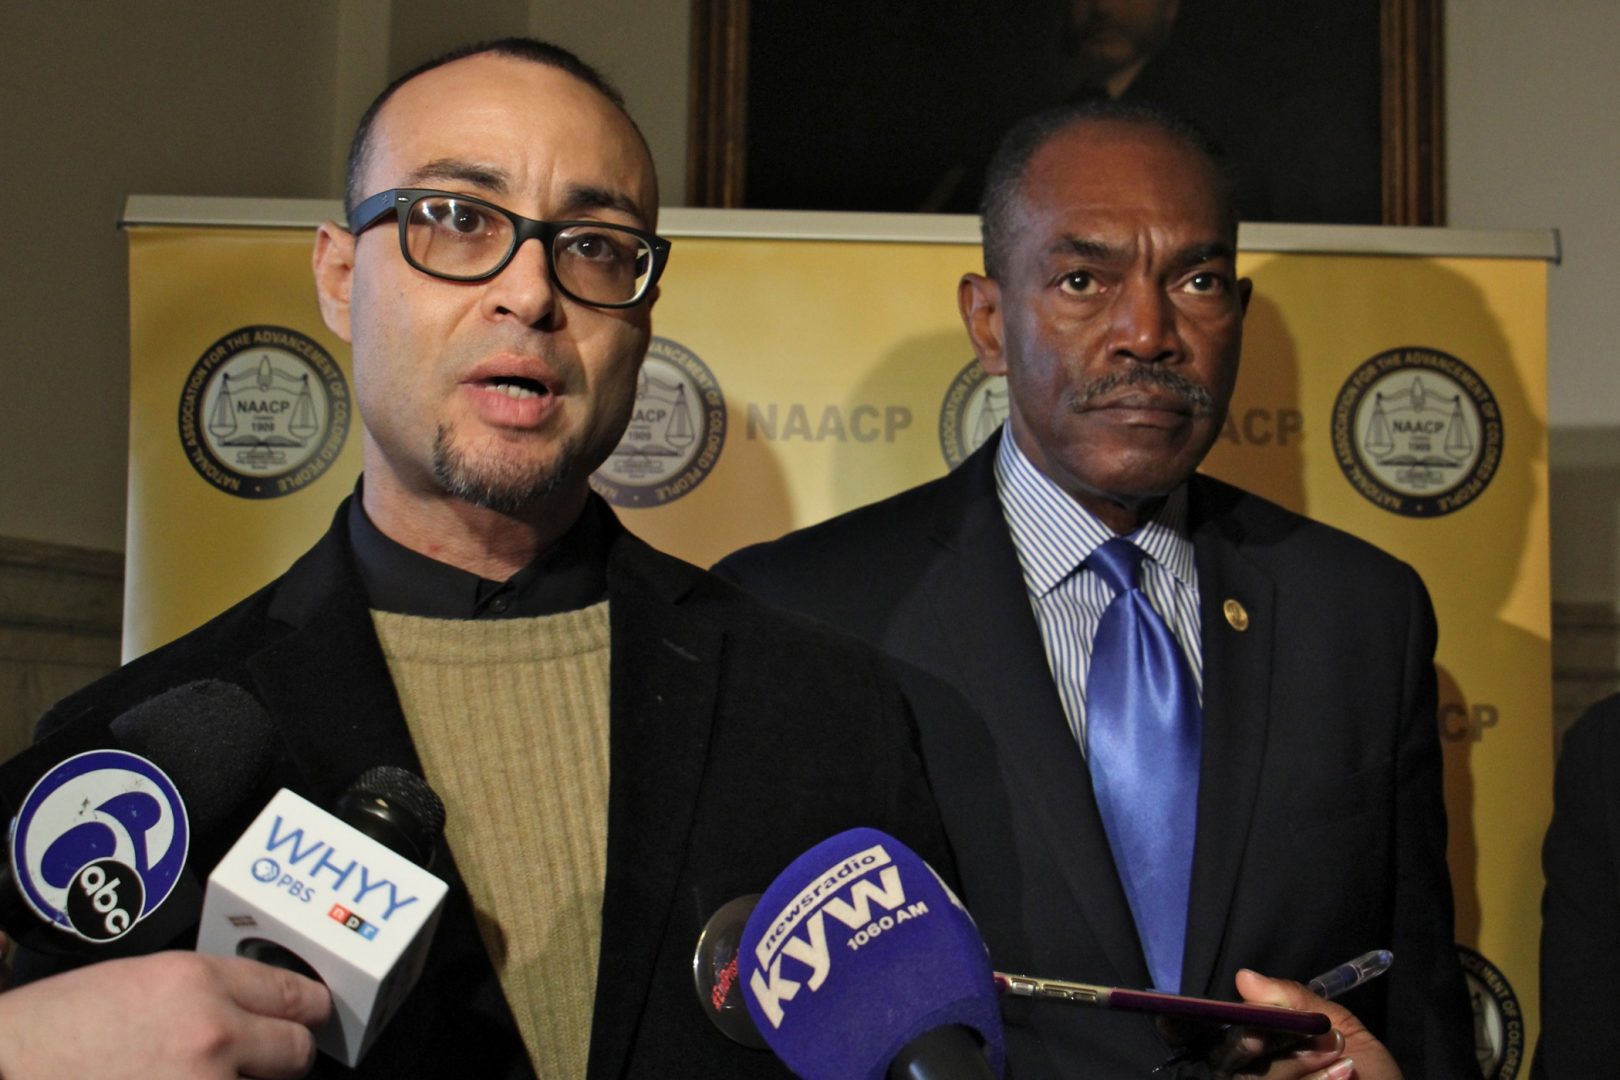 The NAACP has announced that it has filed suit on behalf of Robert Holbrook (left) and other currently and formerly incarcerated people whose Census numbers apply to the community where they are incarcerated rather than where they live. Holbrook spoke during a press conference at City Hall, accompanied by Philadelphia NAACP President Rodney Muhammad (right).